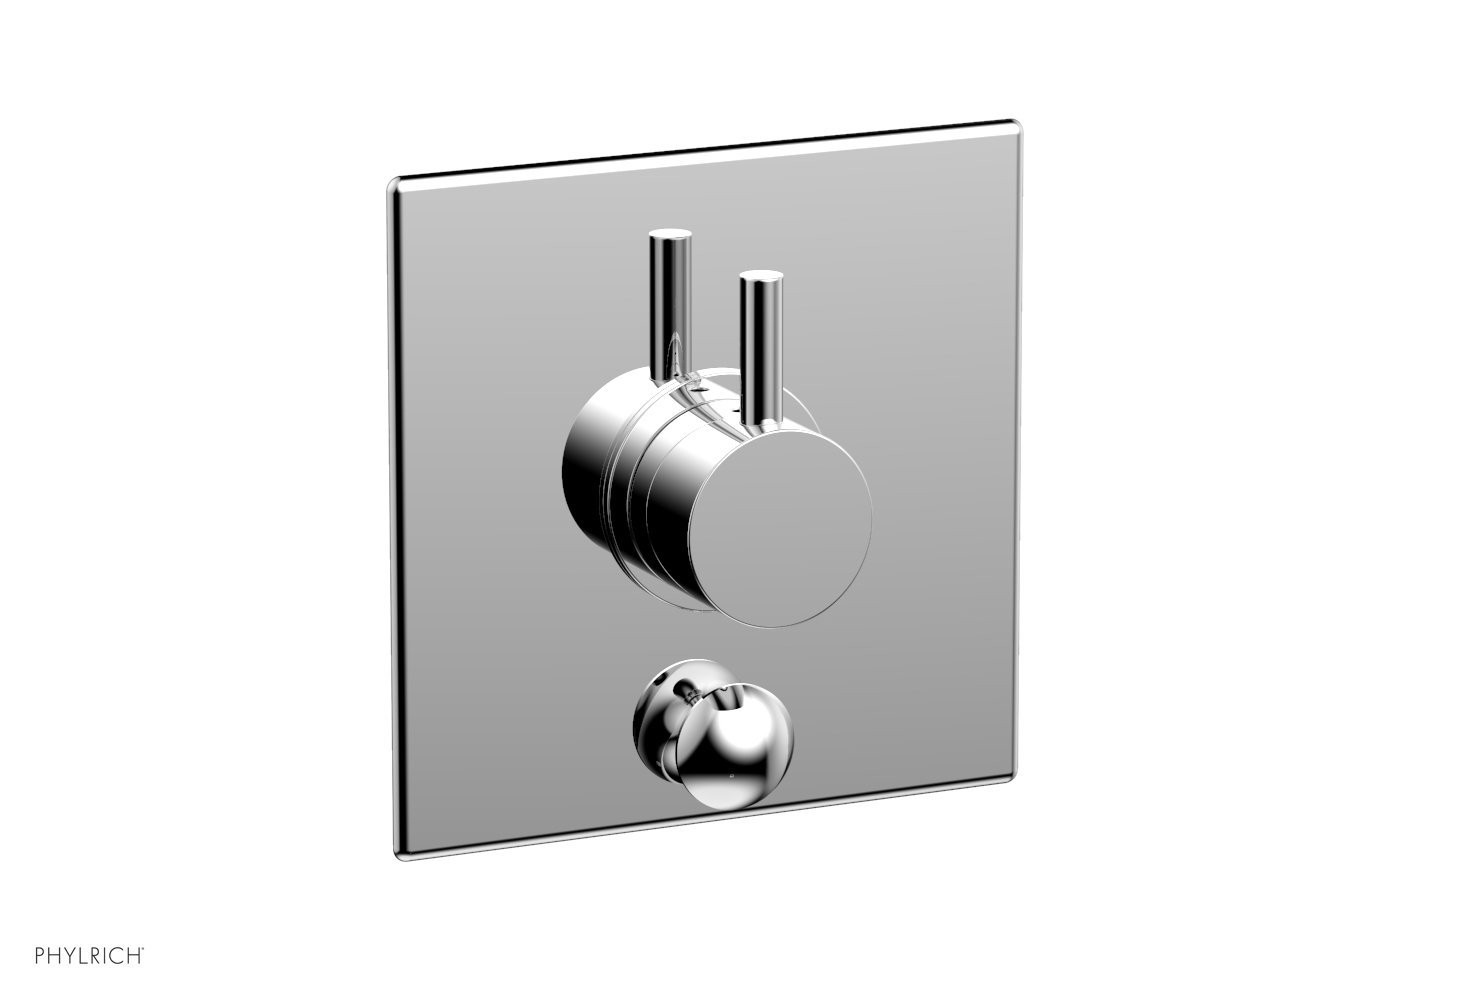 PHYLRICH 4-203/026 BASIC II WALL MOUNT PRESSURE BALANCE SHOWER PLATE WITH DIVERTER AND LEVER HANDLE TRIM